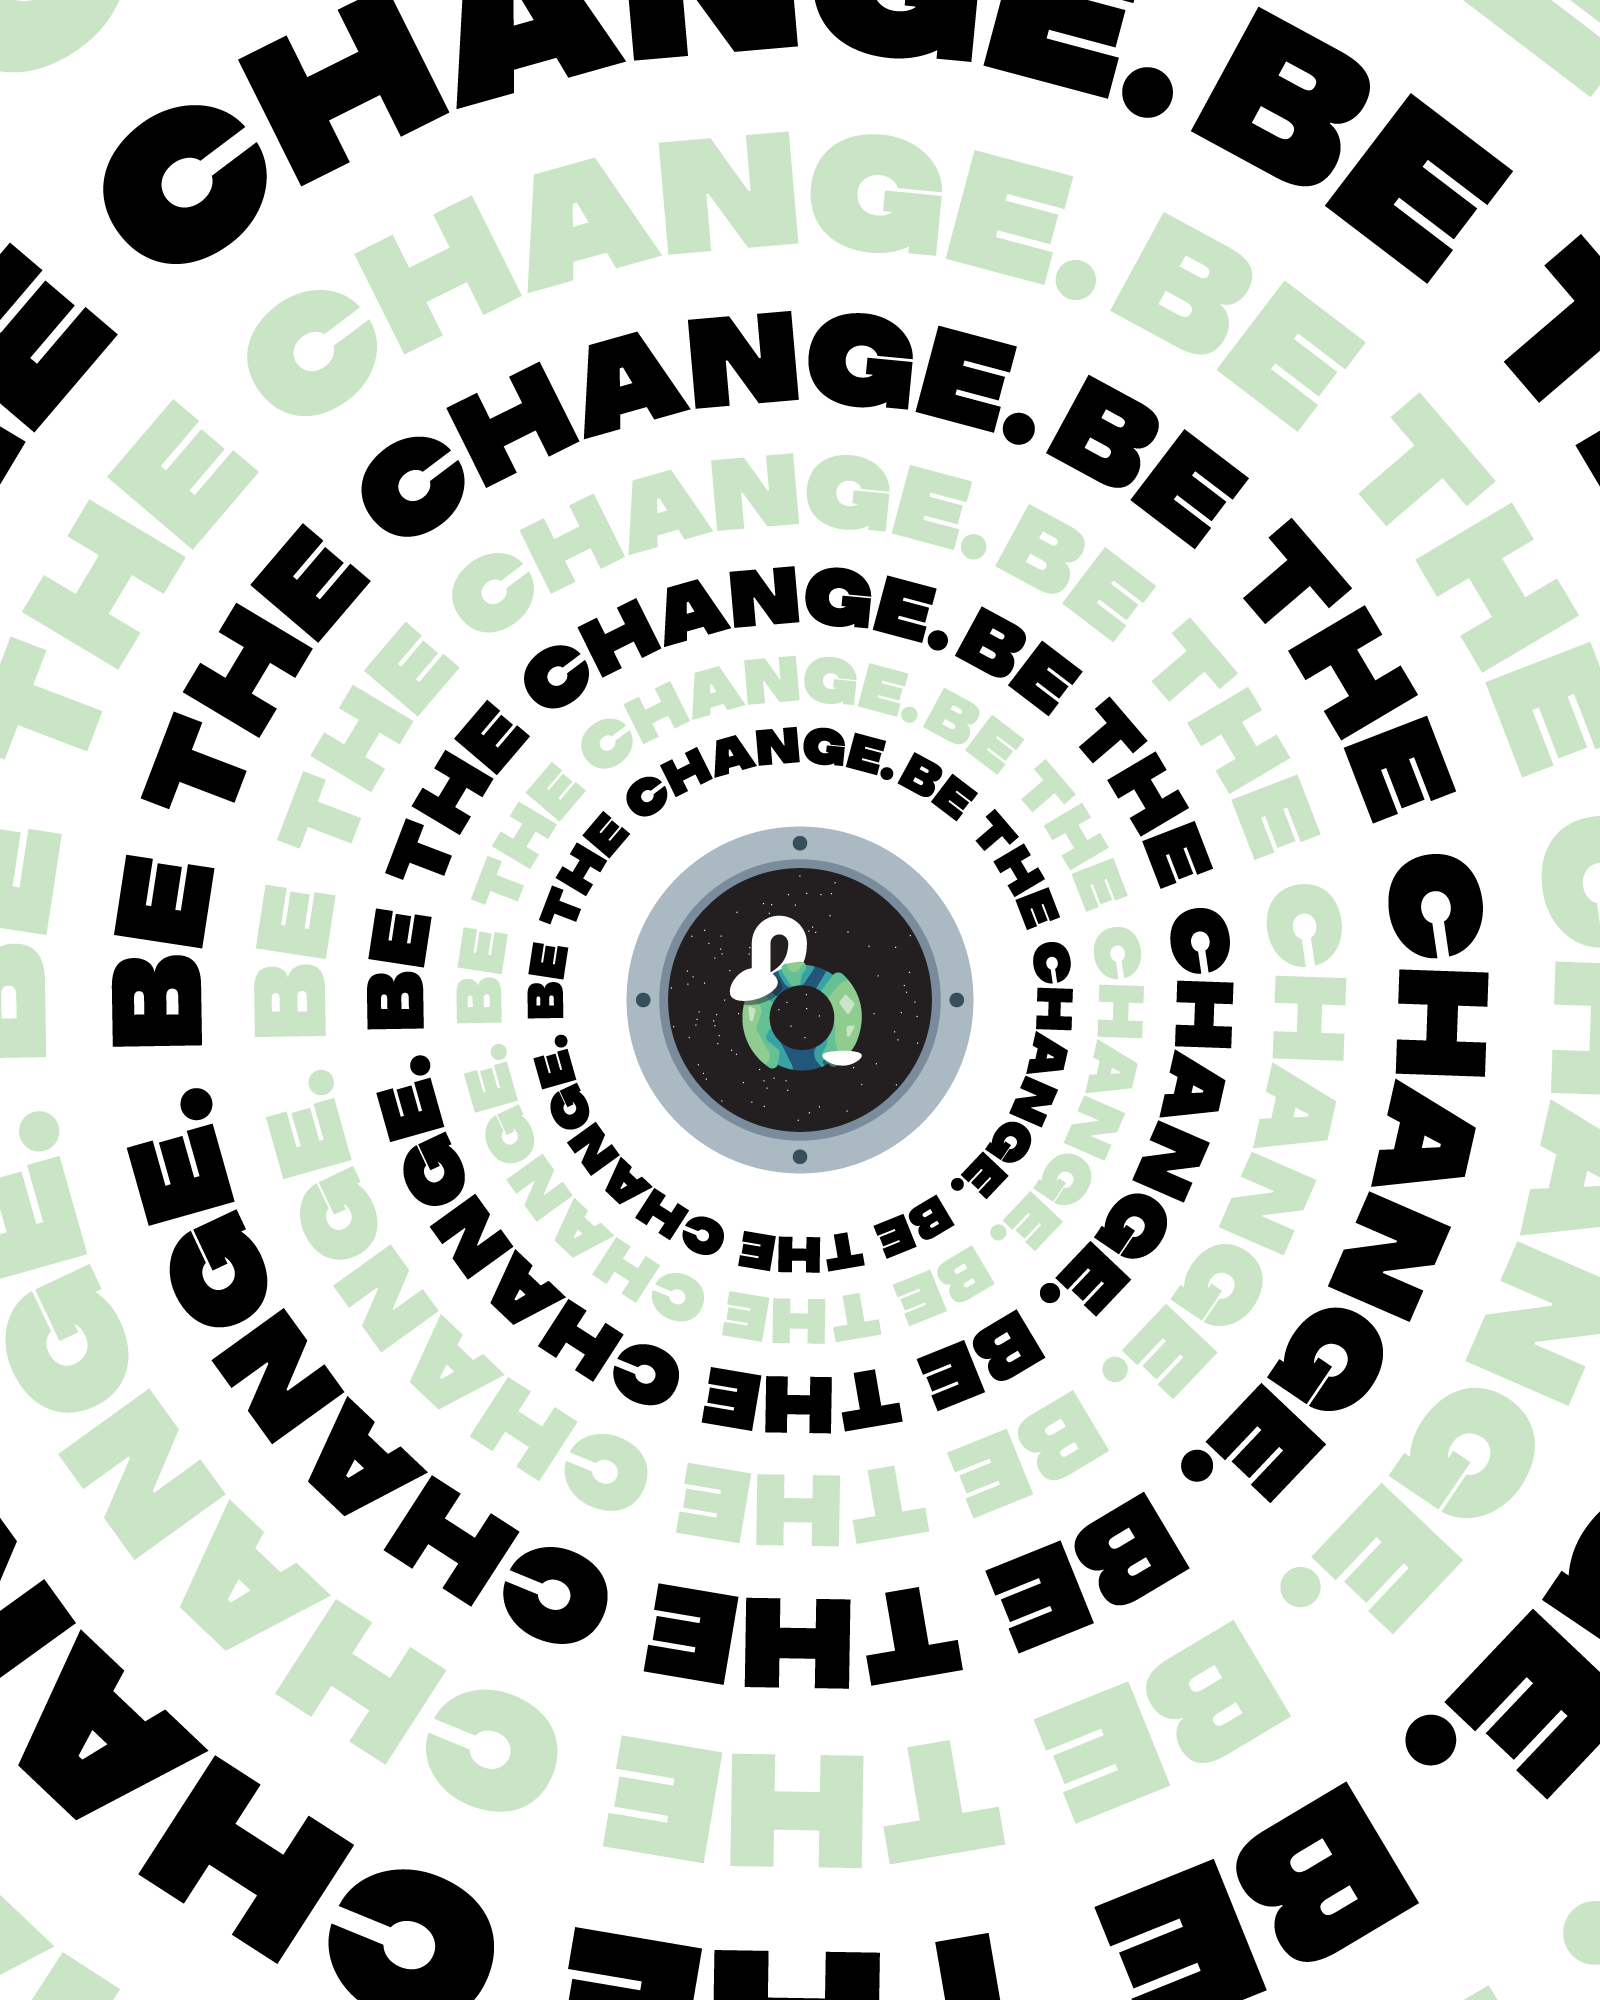 To follow the design guidelines of Be Happy's poster I wanted to keep the wrapping text. In addition, I decided to make my first animation with this piece. I think having the text wrap in this manner puts a certain exigence on the topic which is fitting for the idea of "be the change." (https://bybrice.com/products/be-the-change)